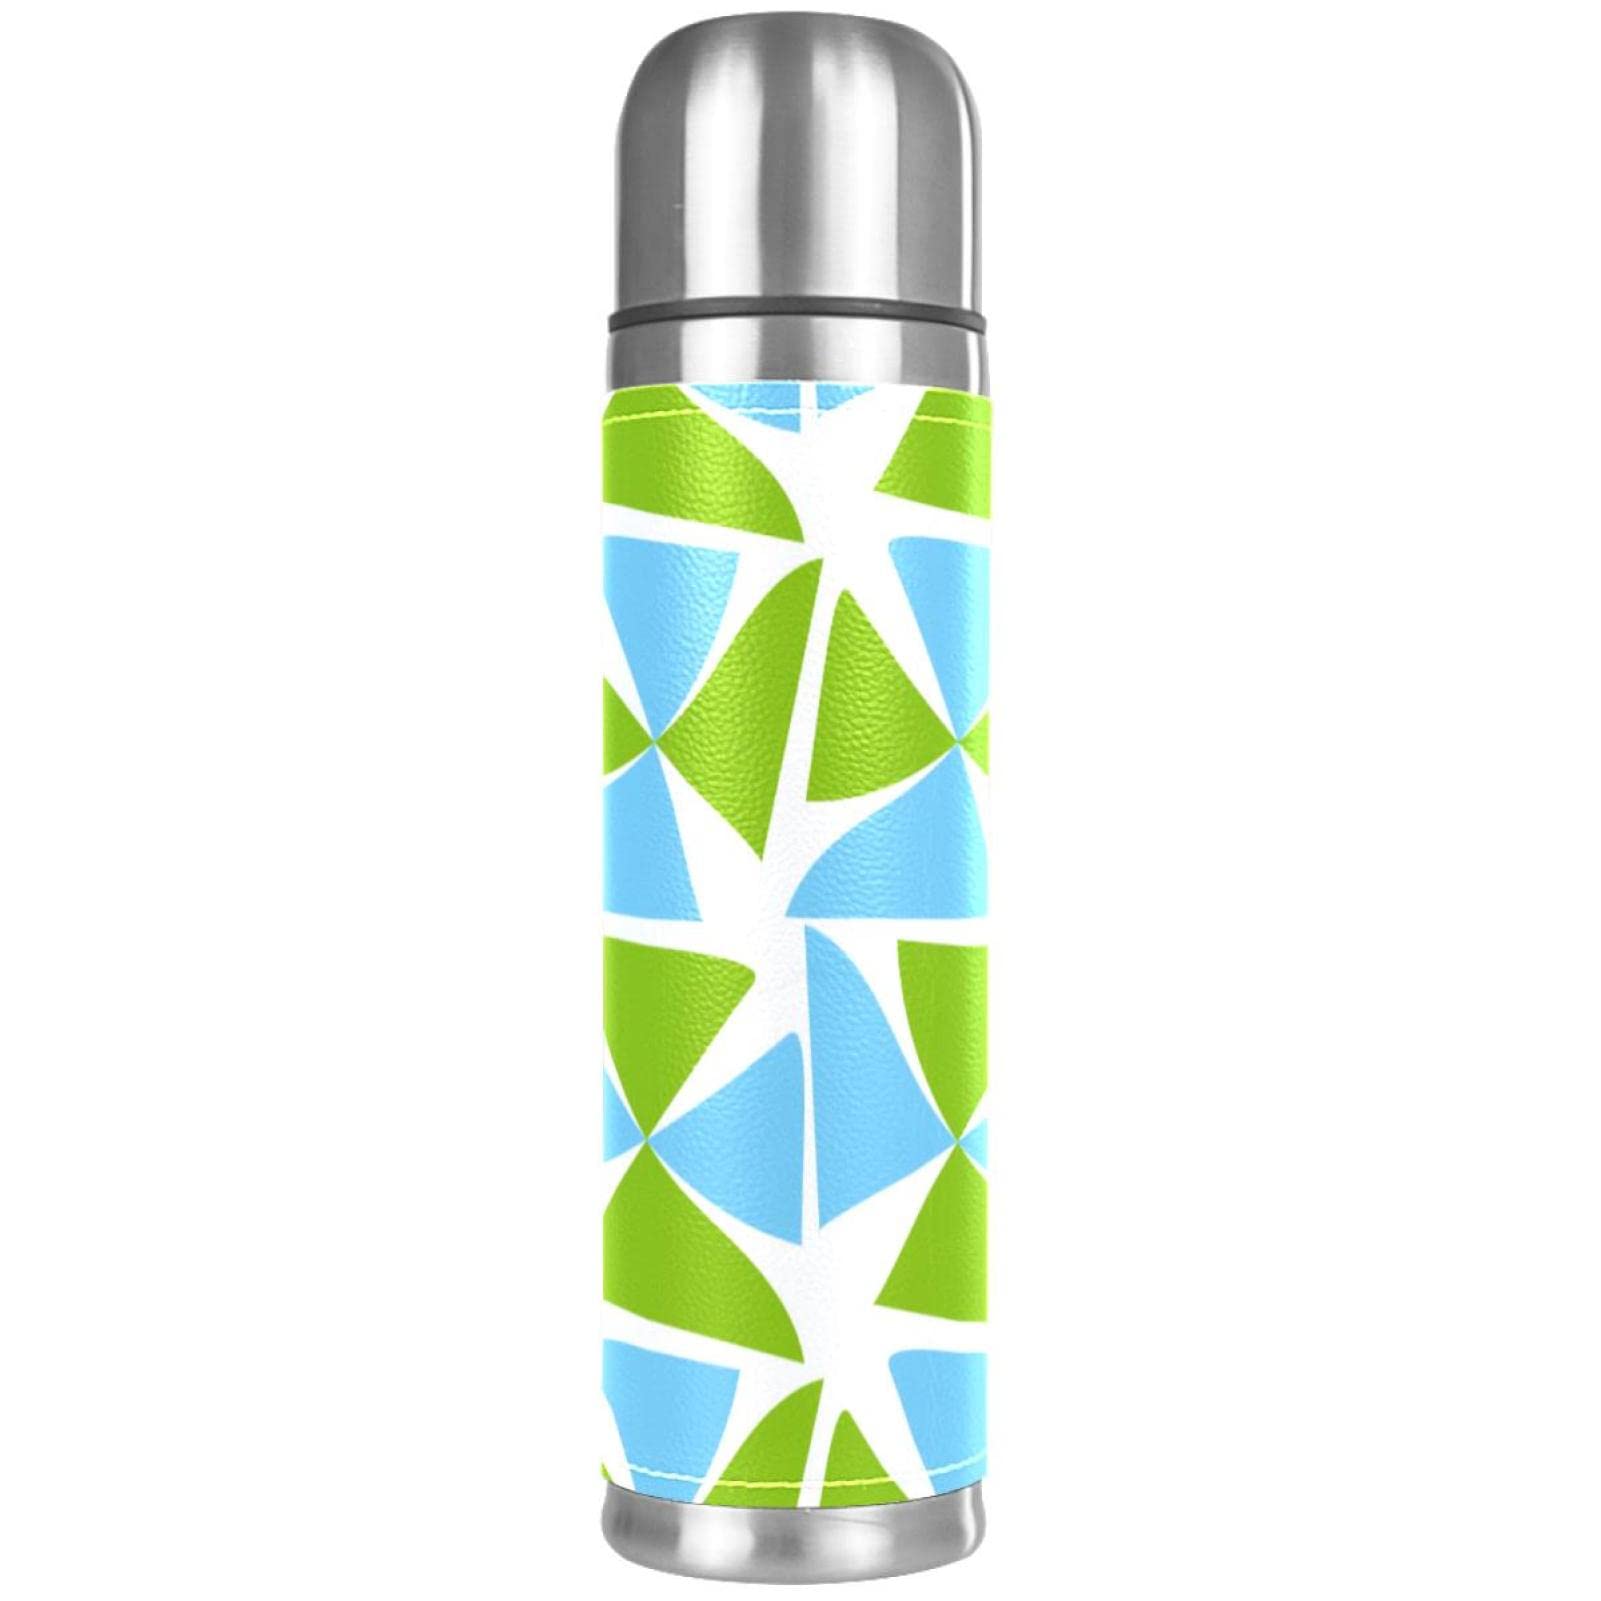 Stainless Steel Leather Vacuum Insulated Mug Abstract Thermos Water Bottle for Hot and Cold Drinks Kids Adults 16 Oz